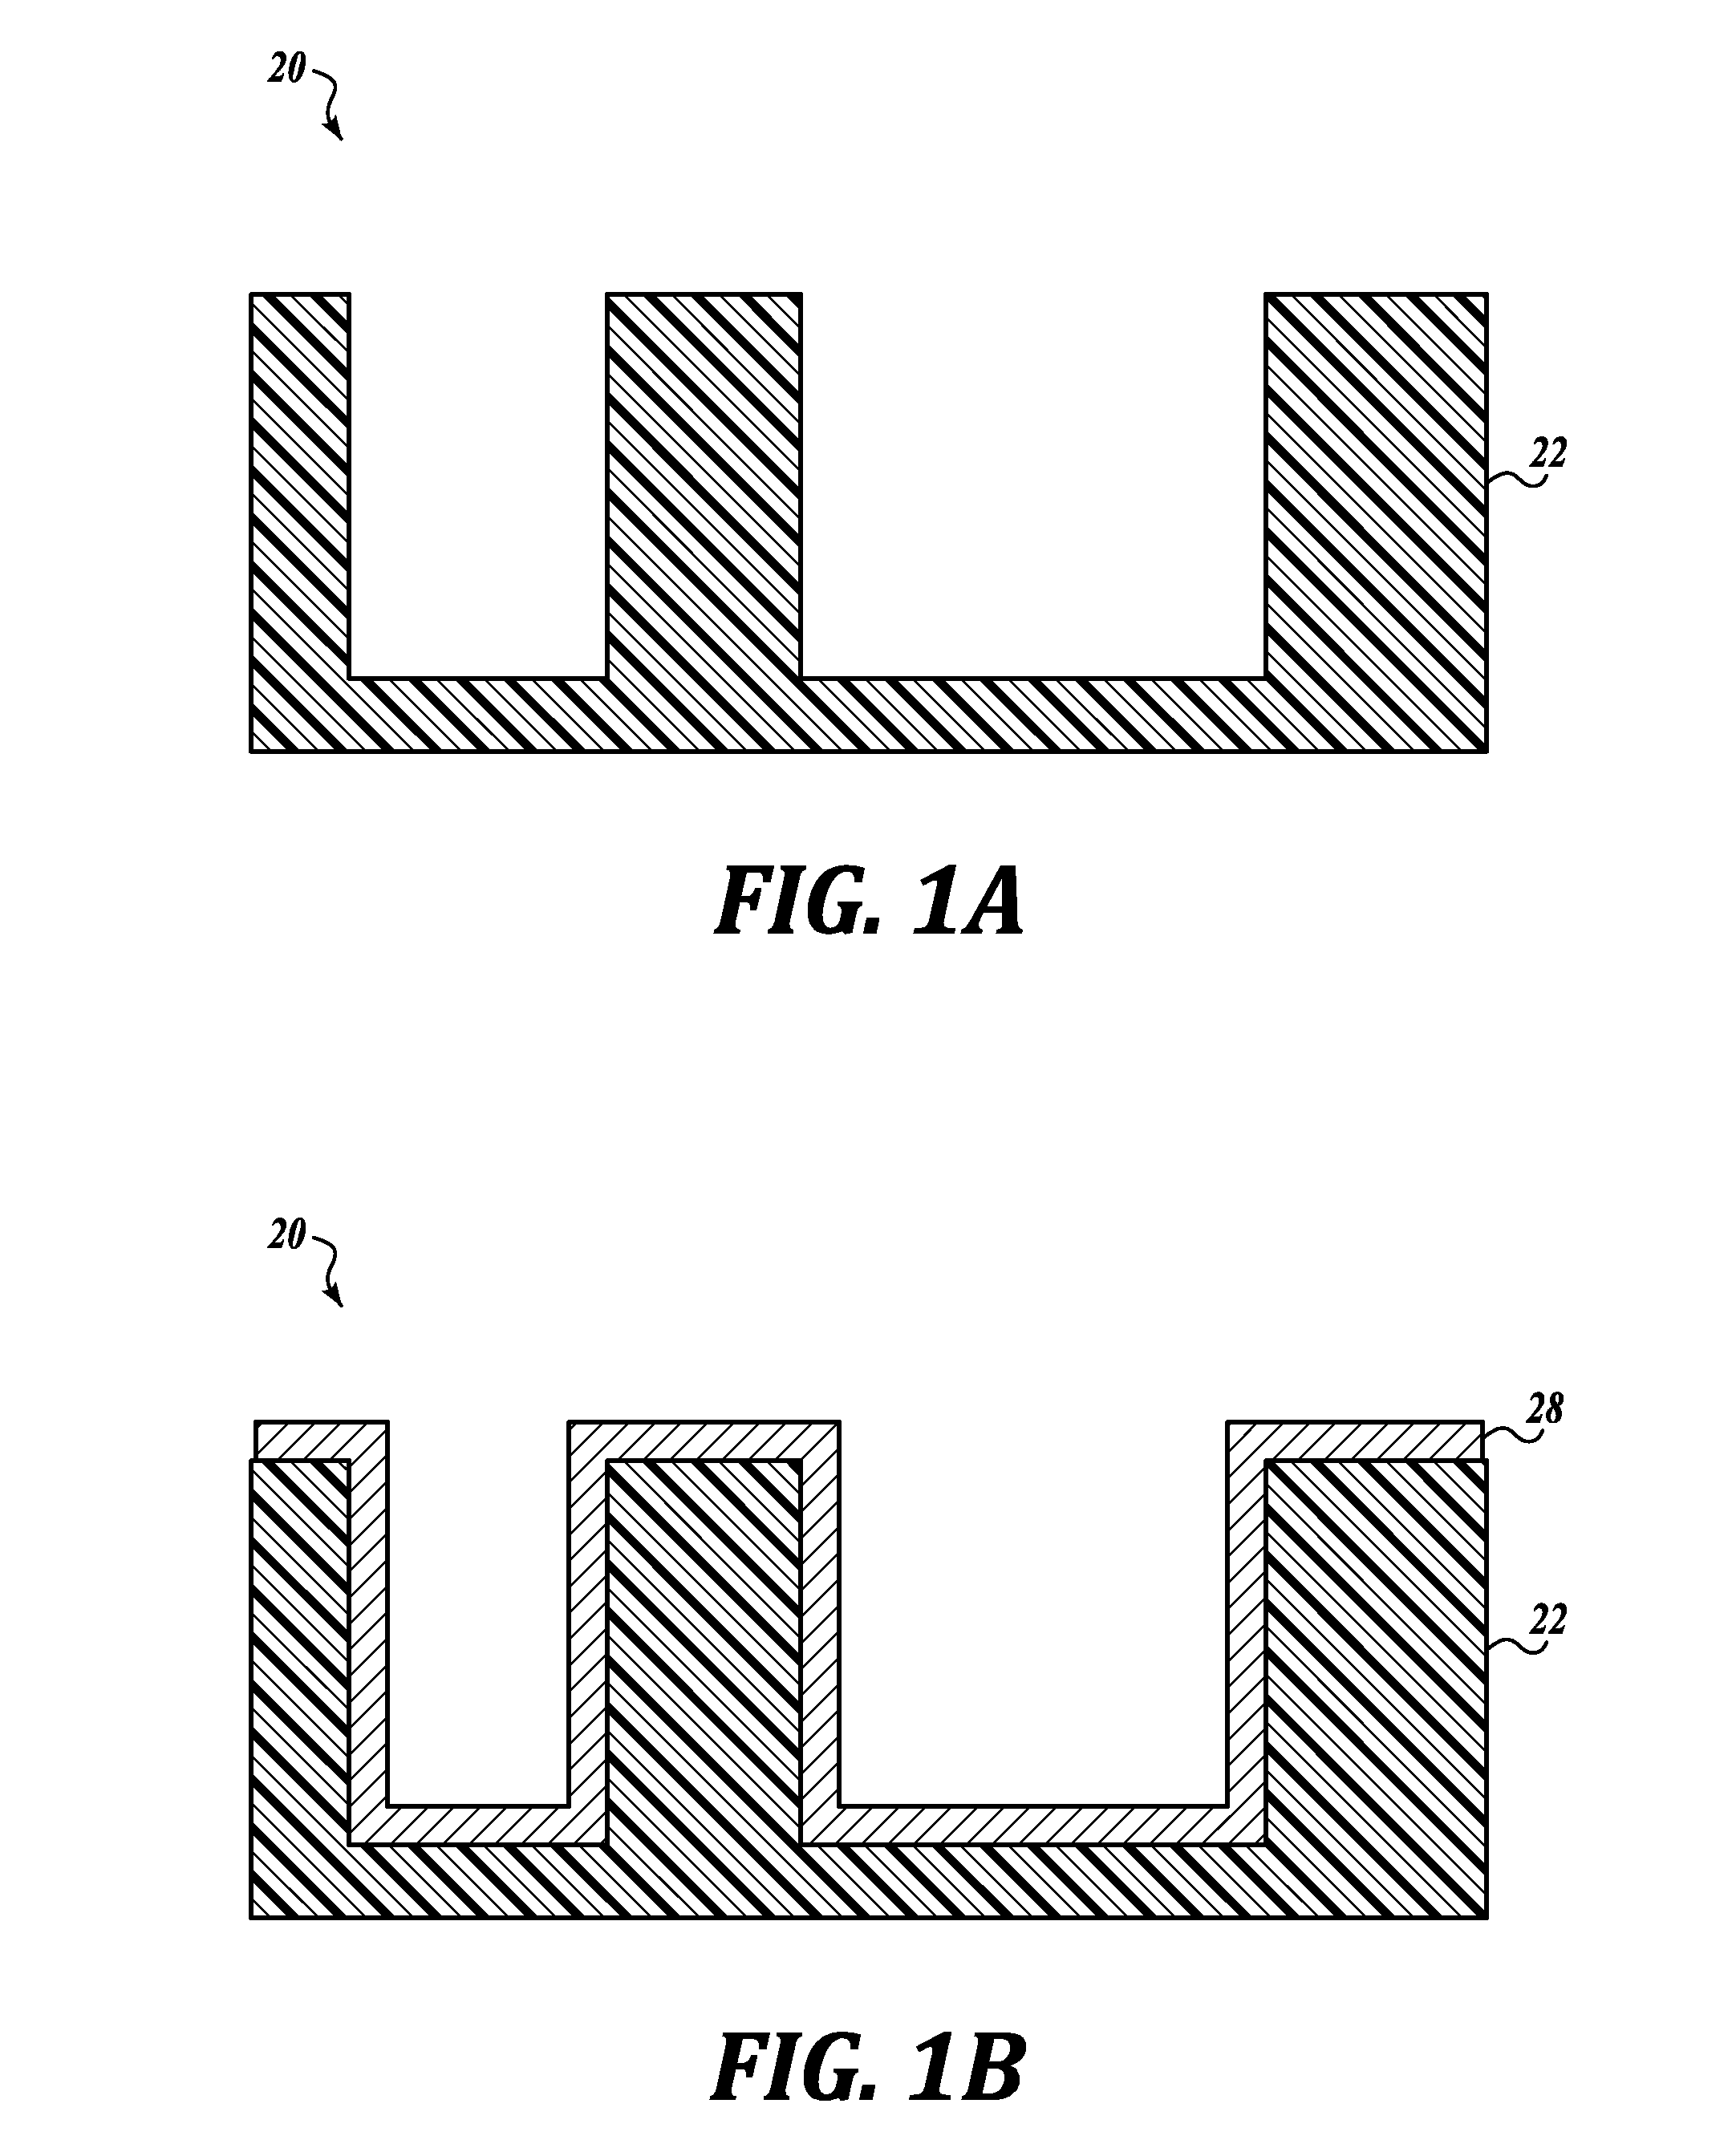 Methods for forming cobalt interconnects